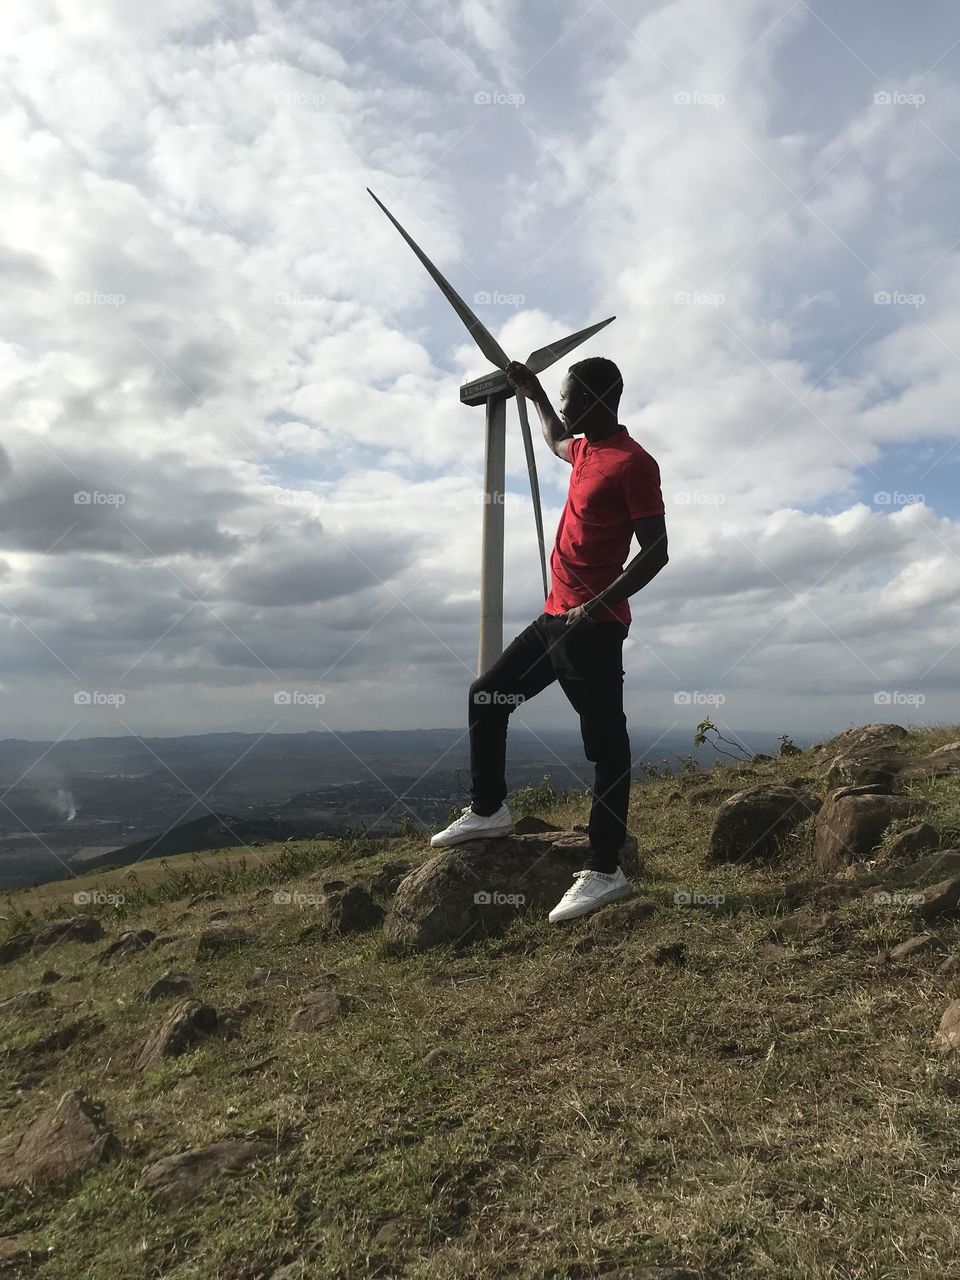 Cloud one person sky wind environment Nature full length Adult Windmill landscape mountain leisure activity day Land Standing adventure Wind power beauty in Nature outdoors Wind Turbine in Ngong, Kenya